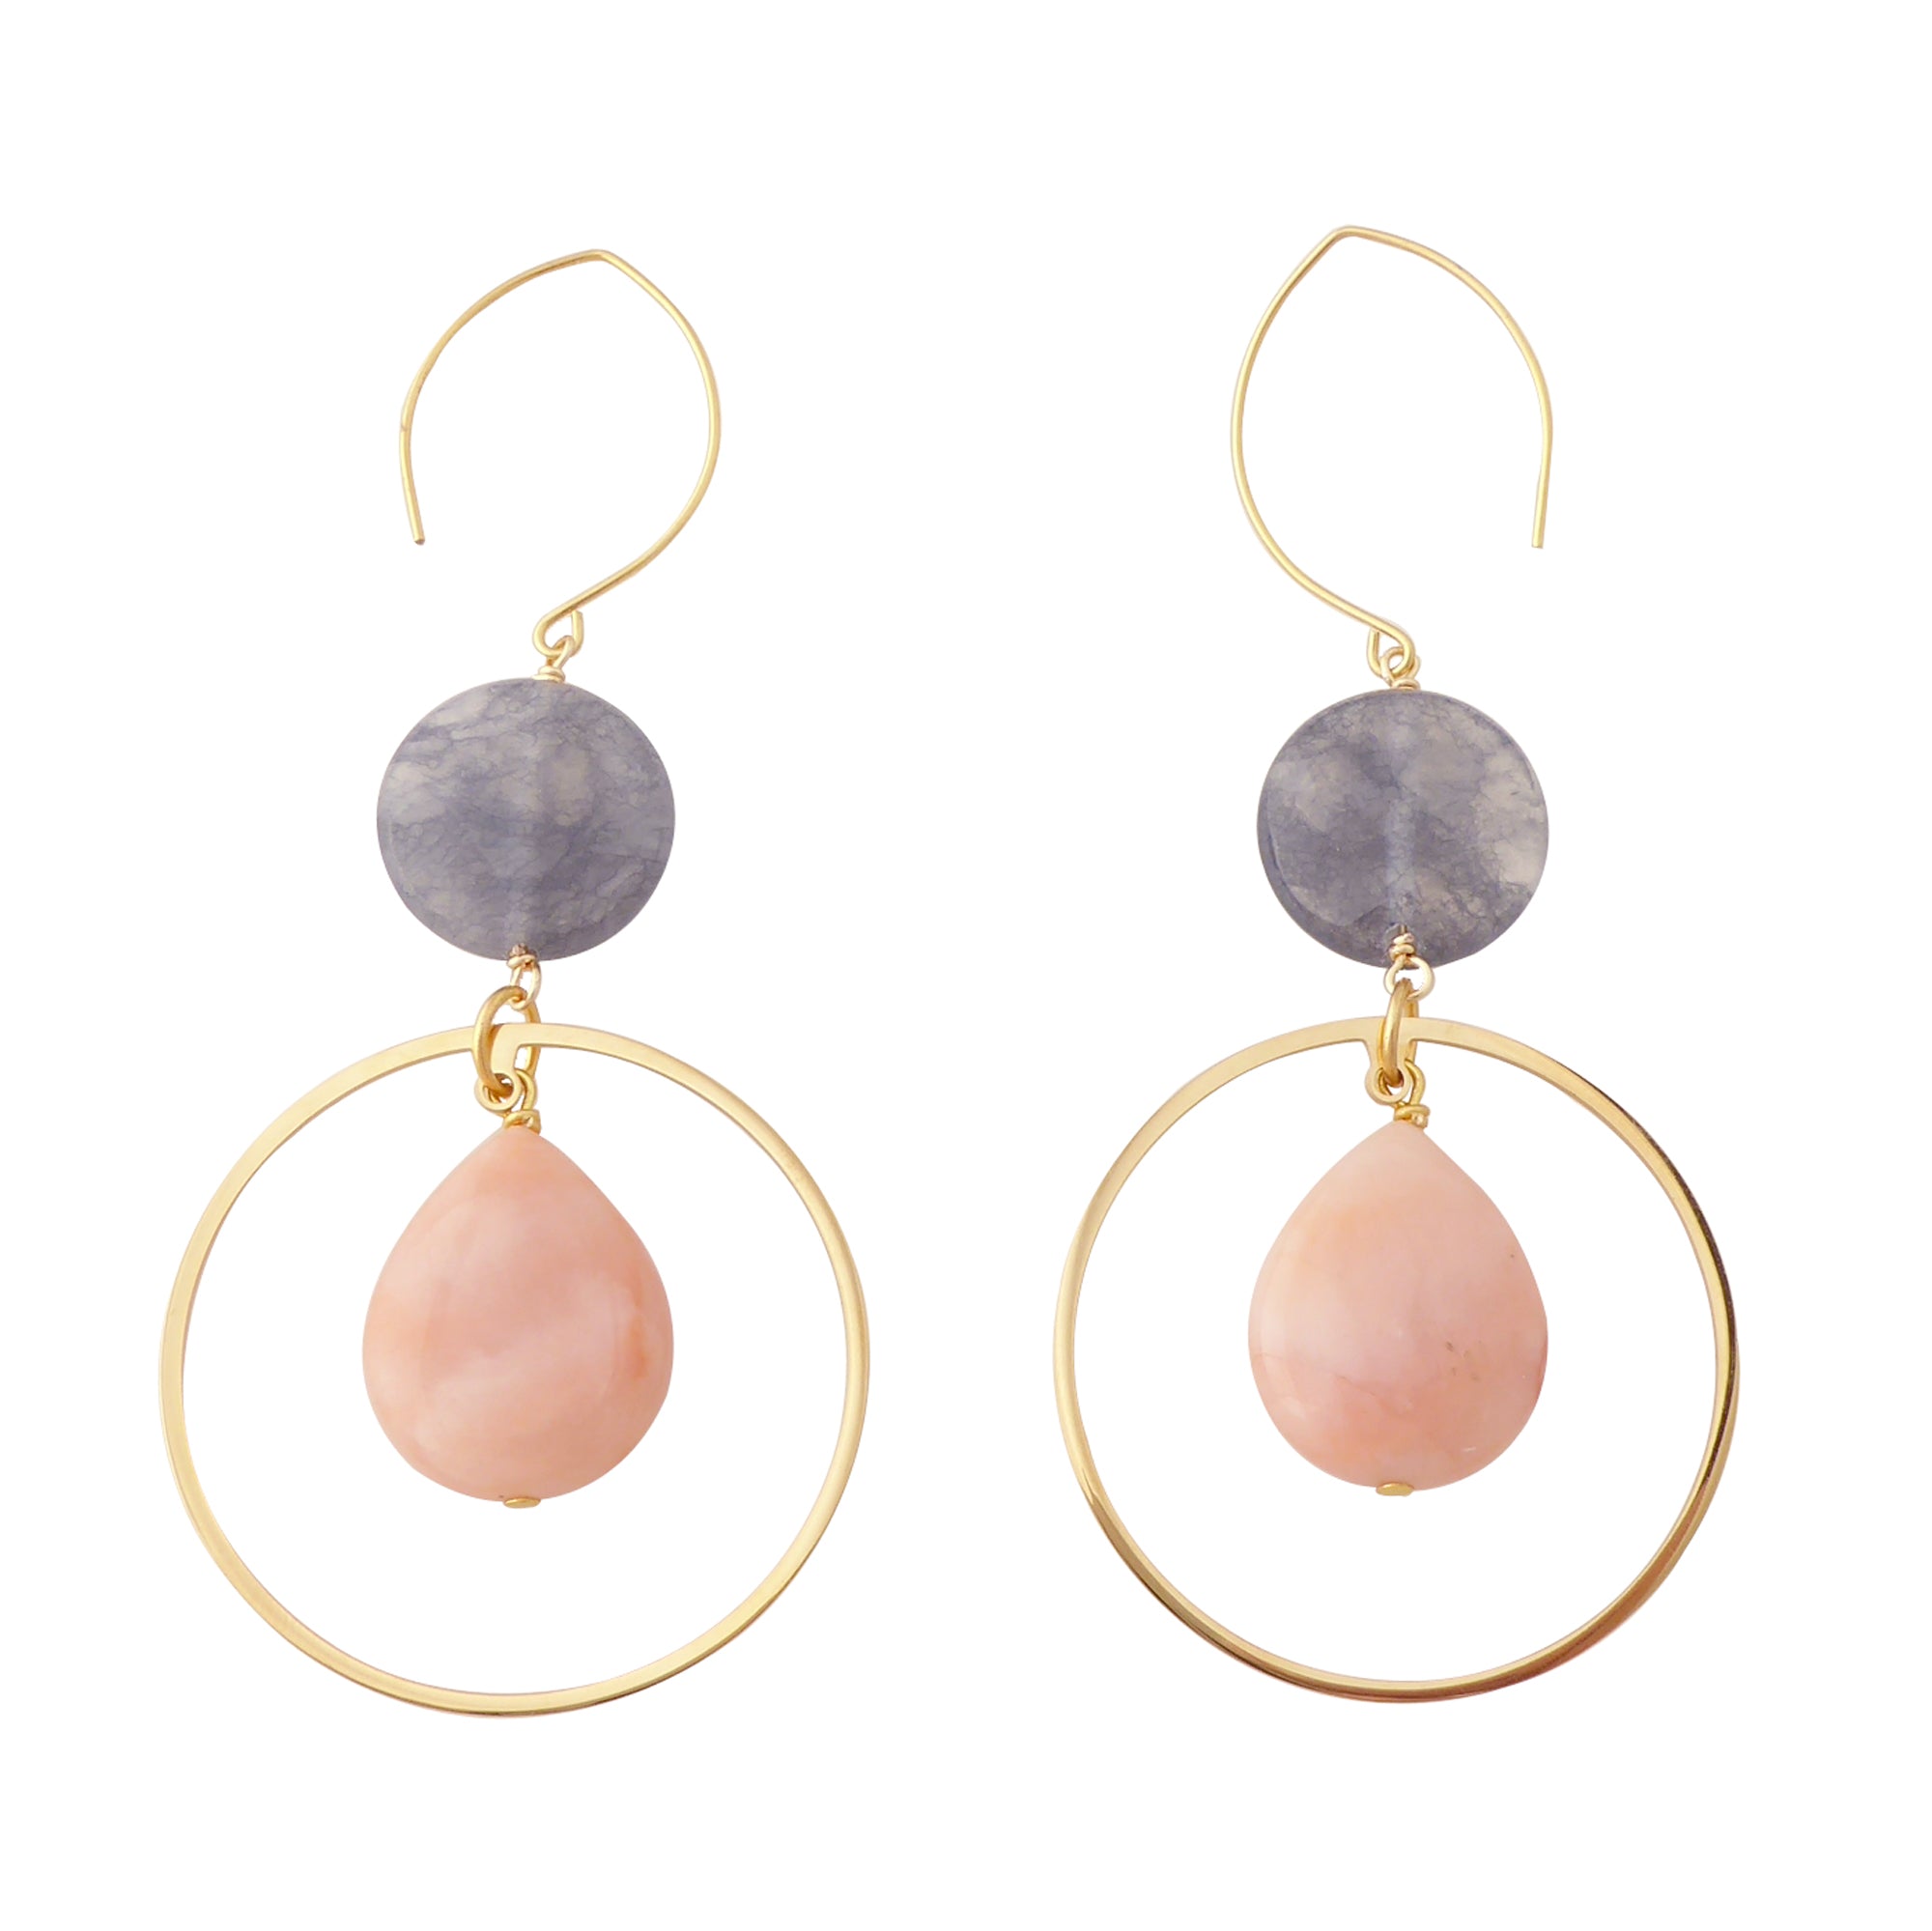 Peach aventurine and storm quartz earrings by Jenny Dayco 1